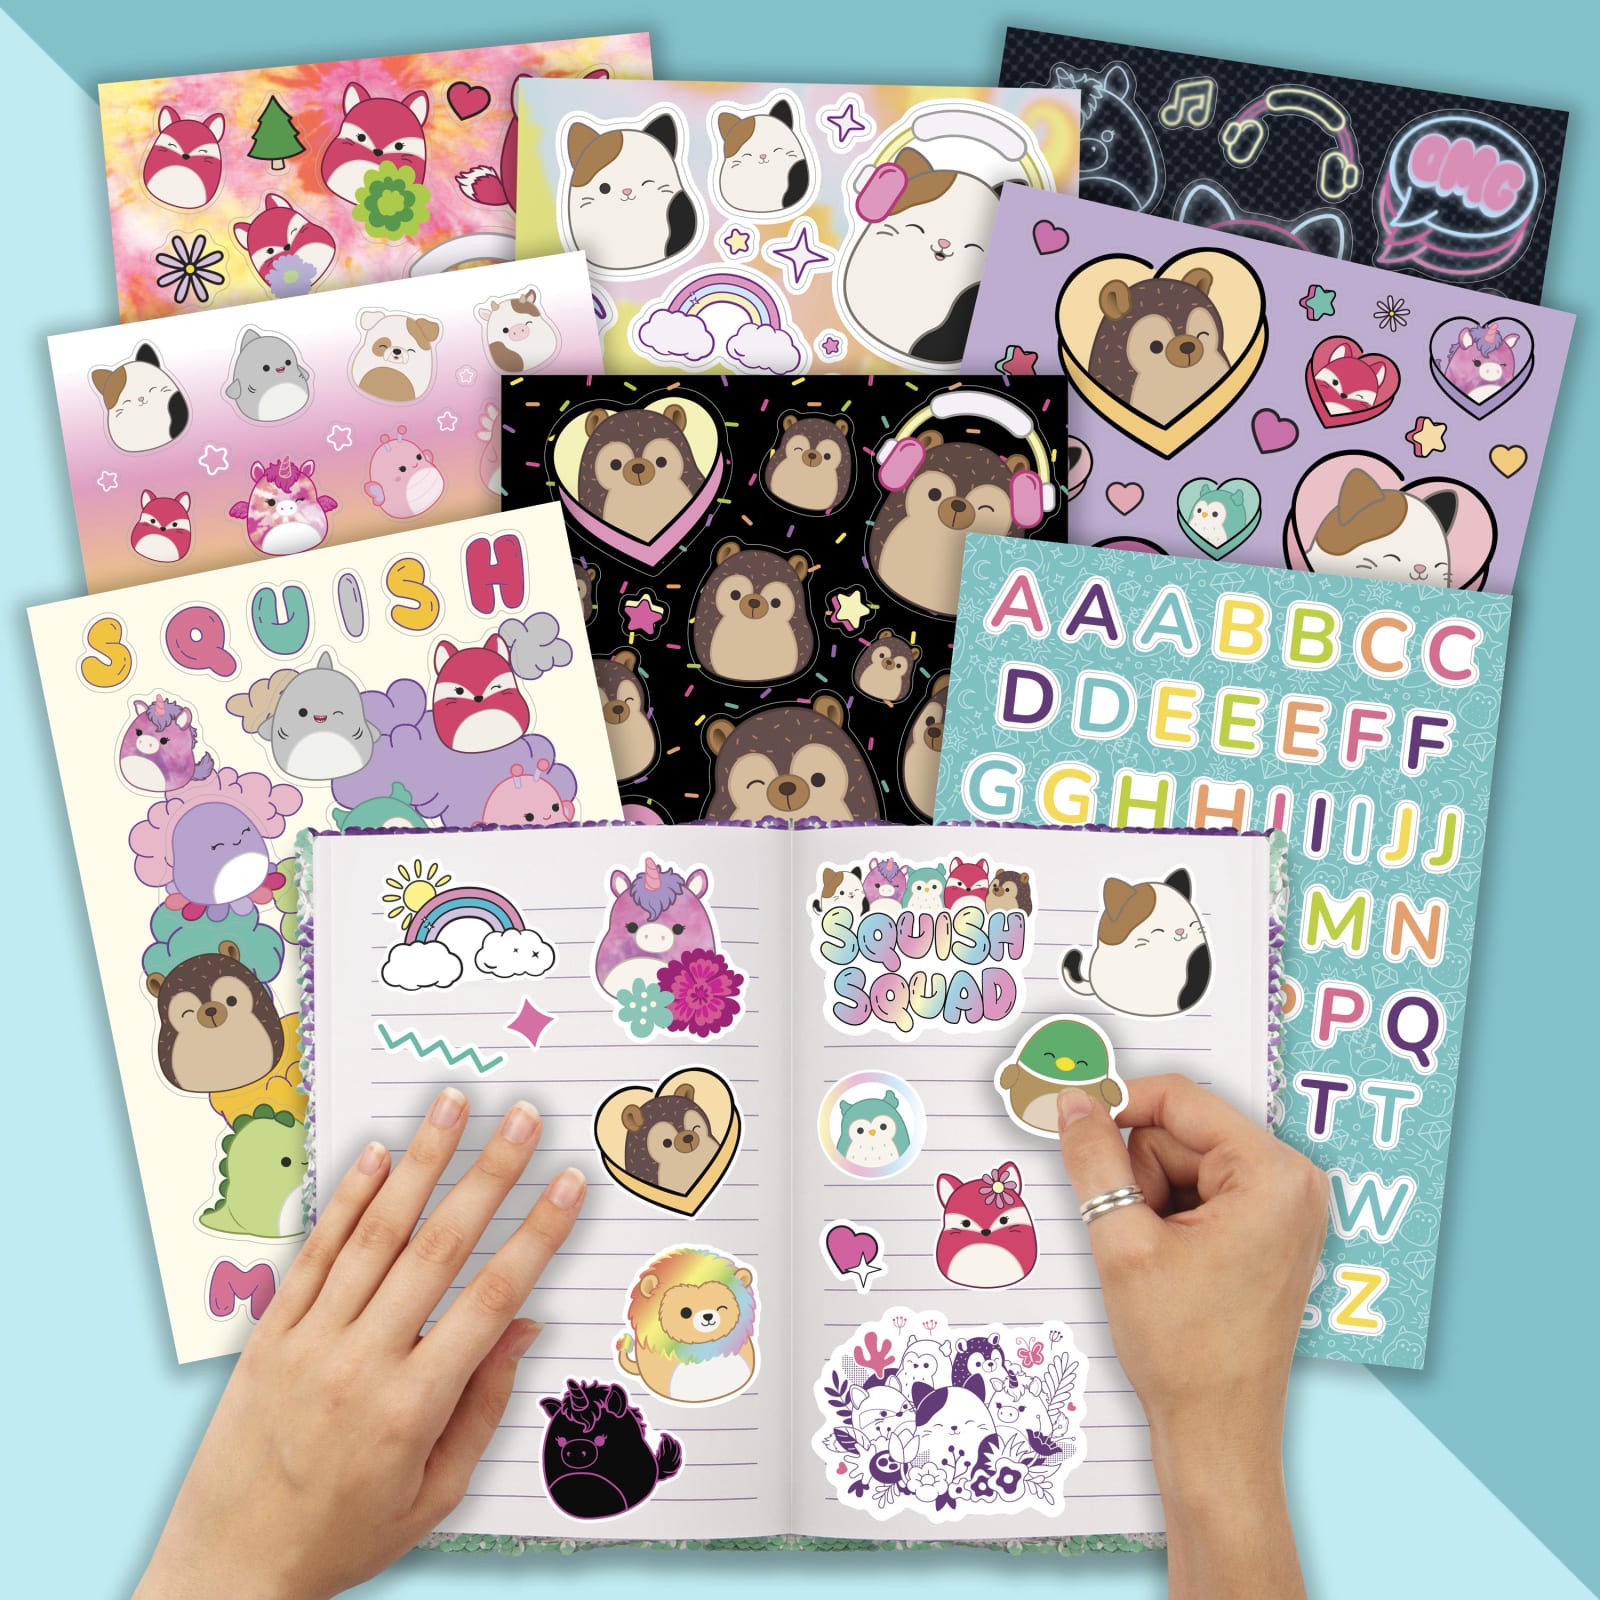 Squish'n w My Mallows 1000+ Sticker Book – Mothership Books and Games TX